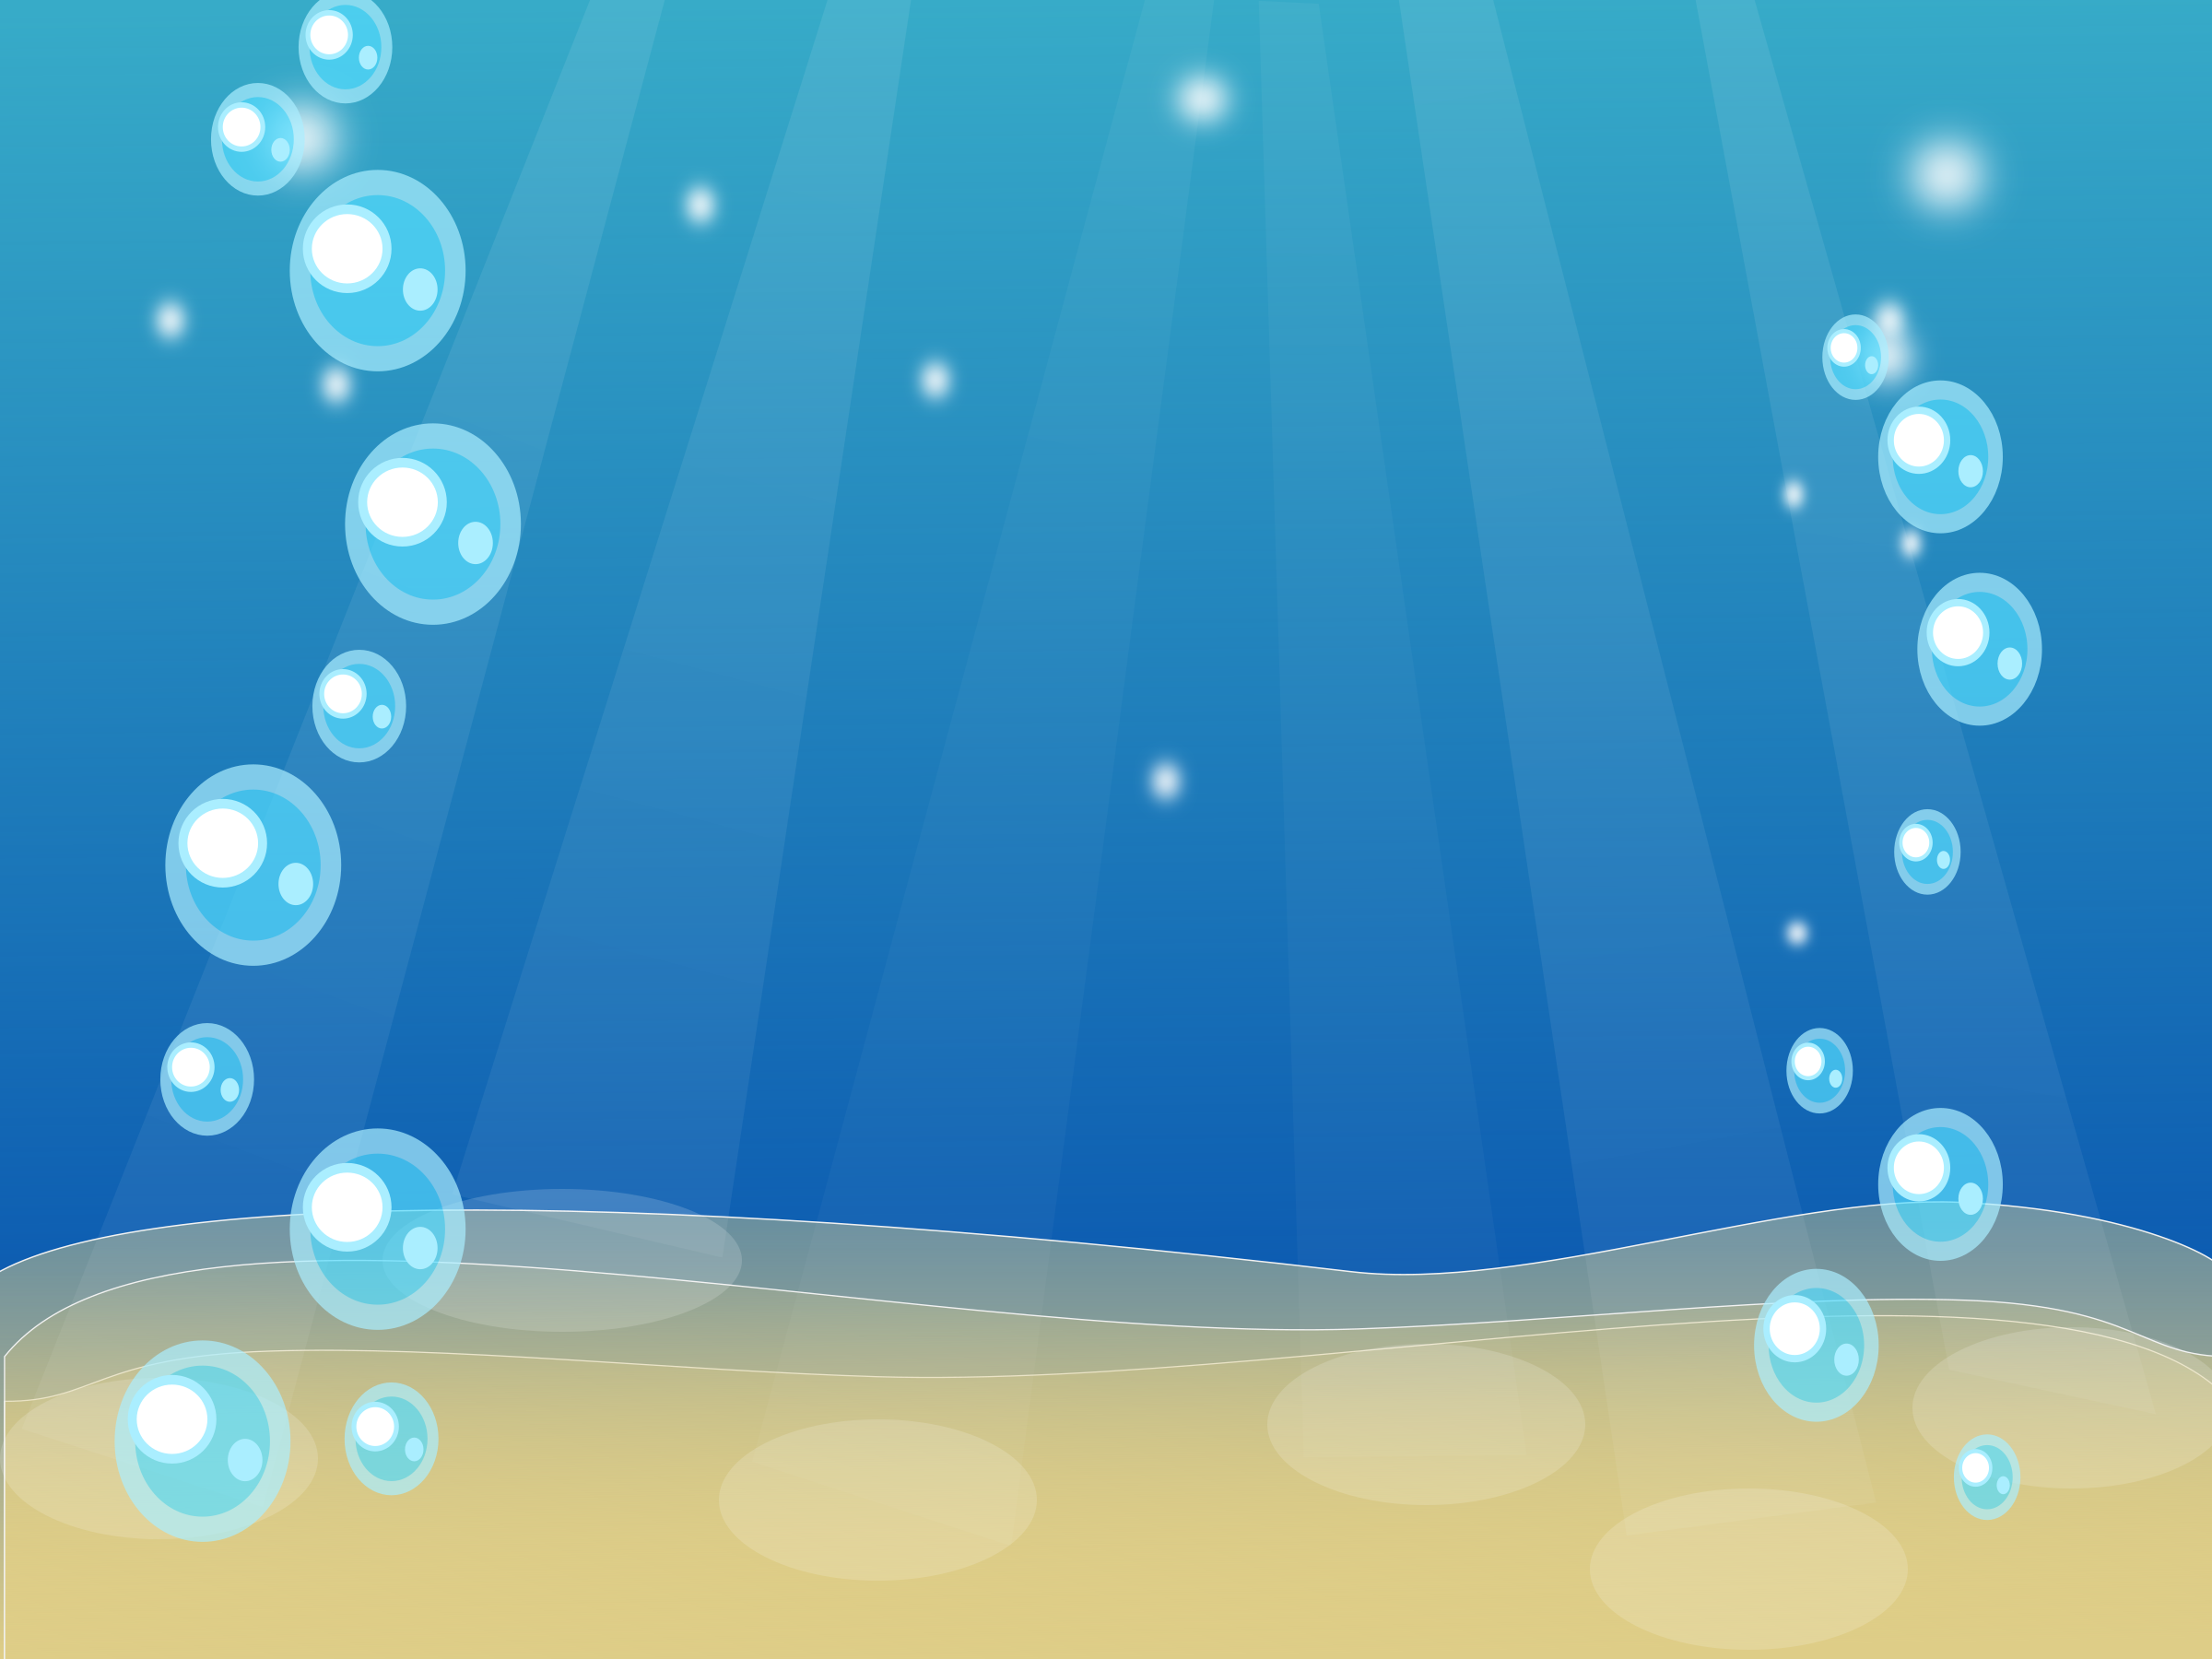 Bubbles in the water vector clipart image - Free stock photo - Public